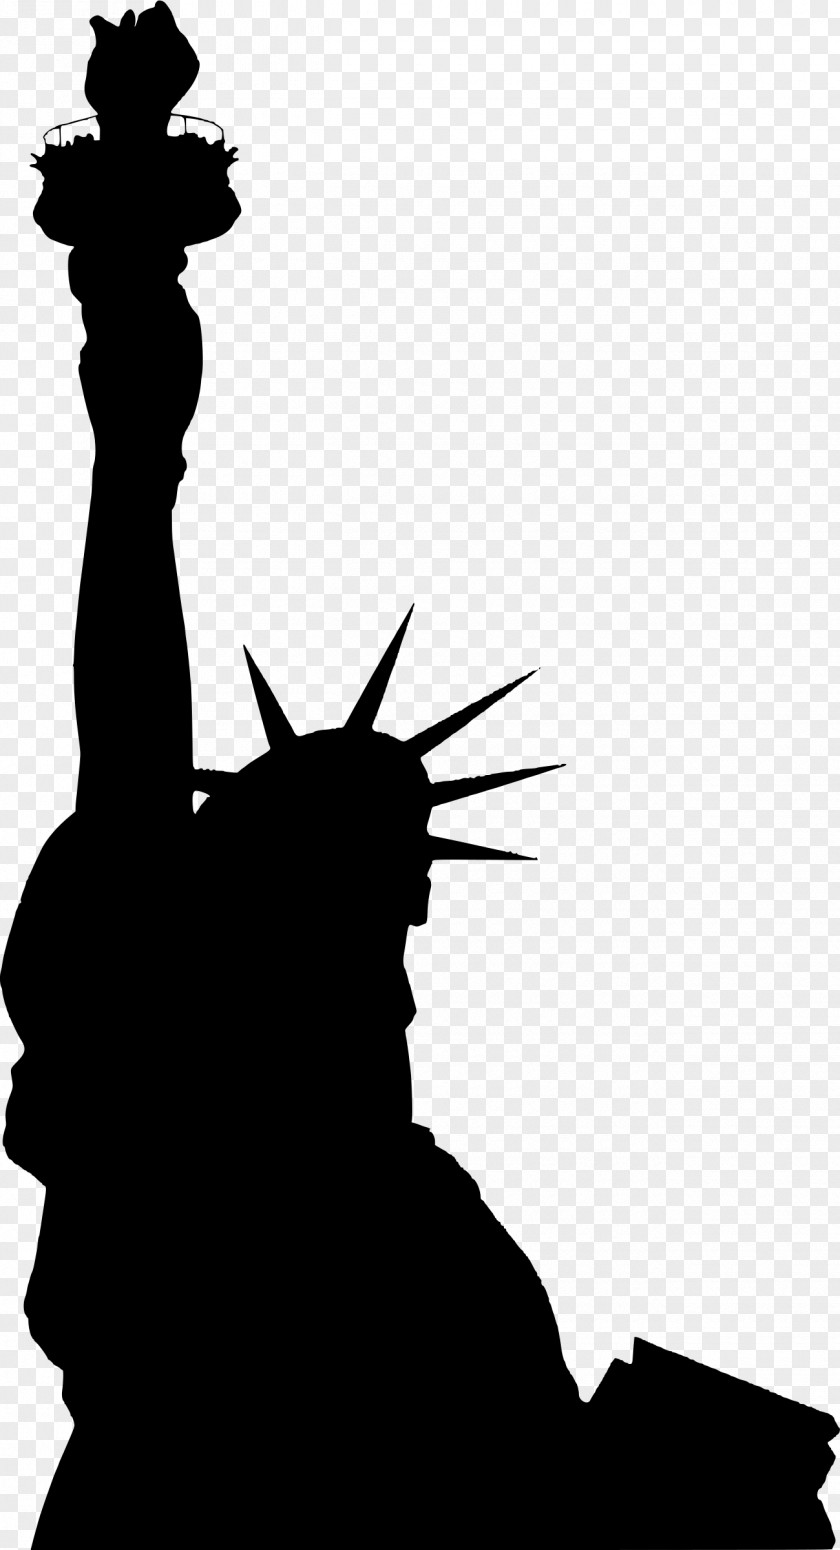 Usa Statue Of Liberty Silhouette Clip Art PNG